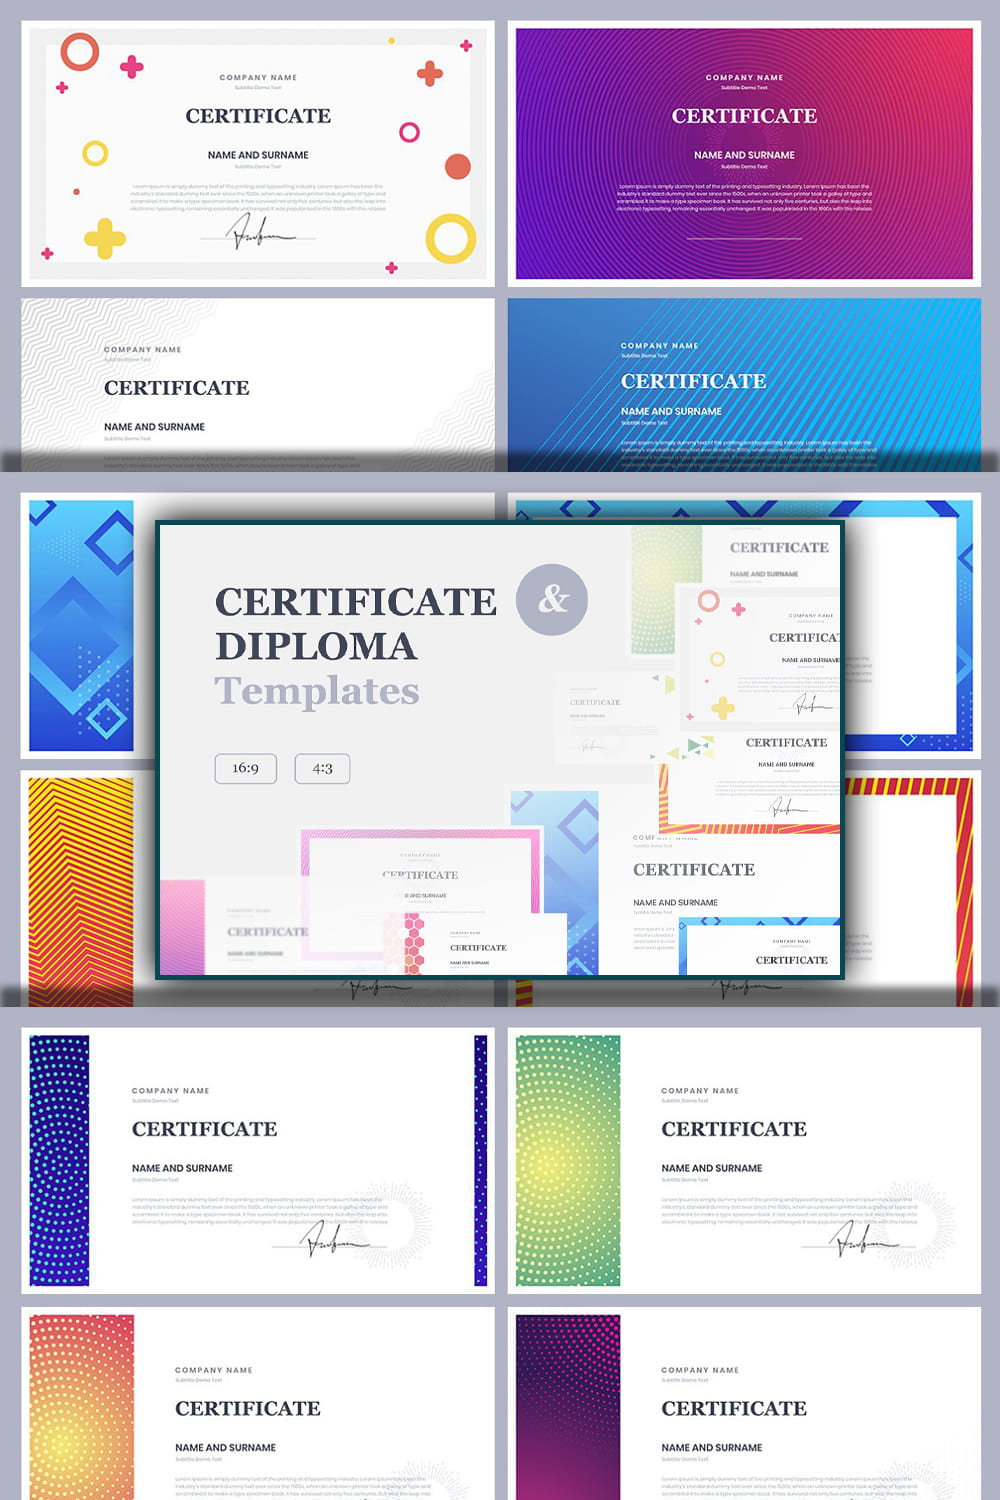 Certificate & Diploma PowerPoint pinterest image.